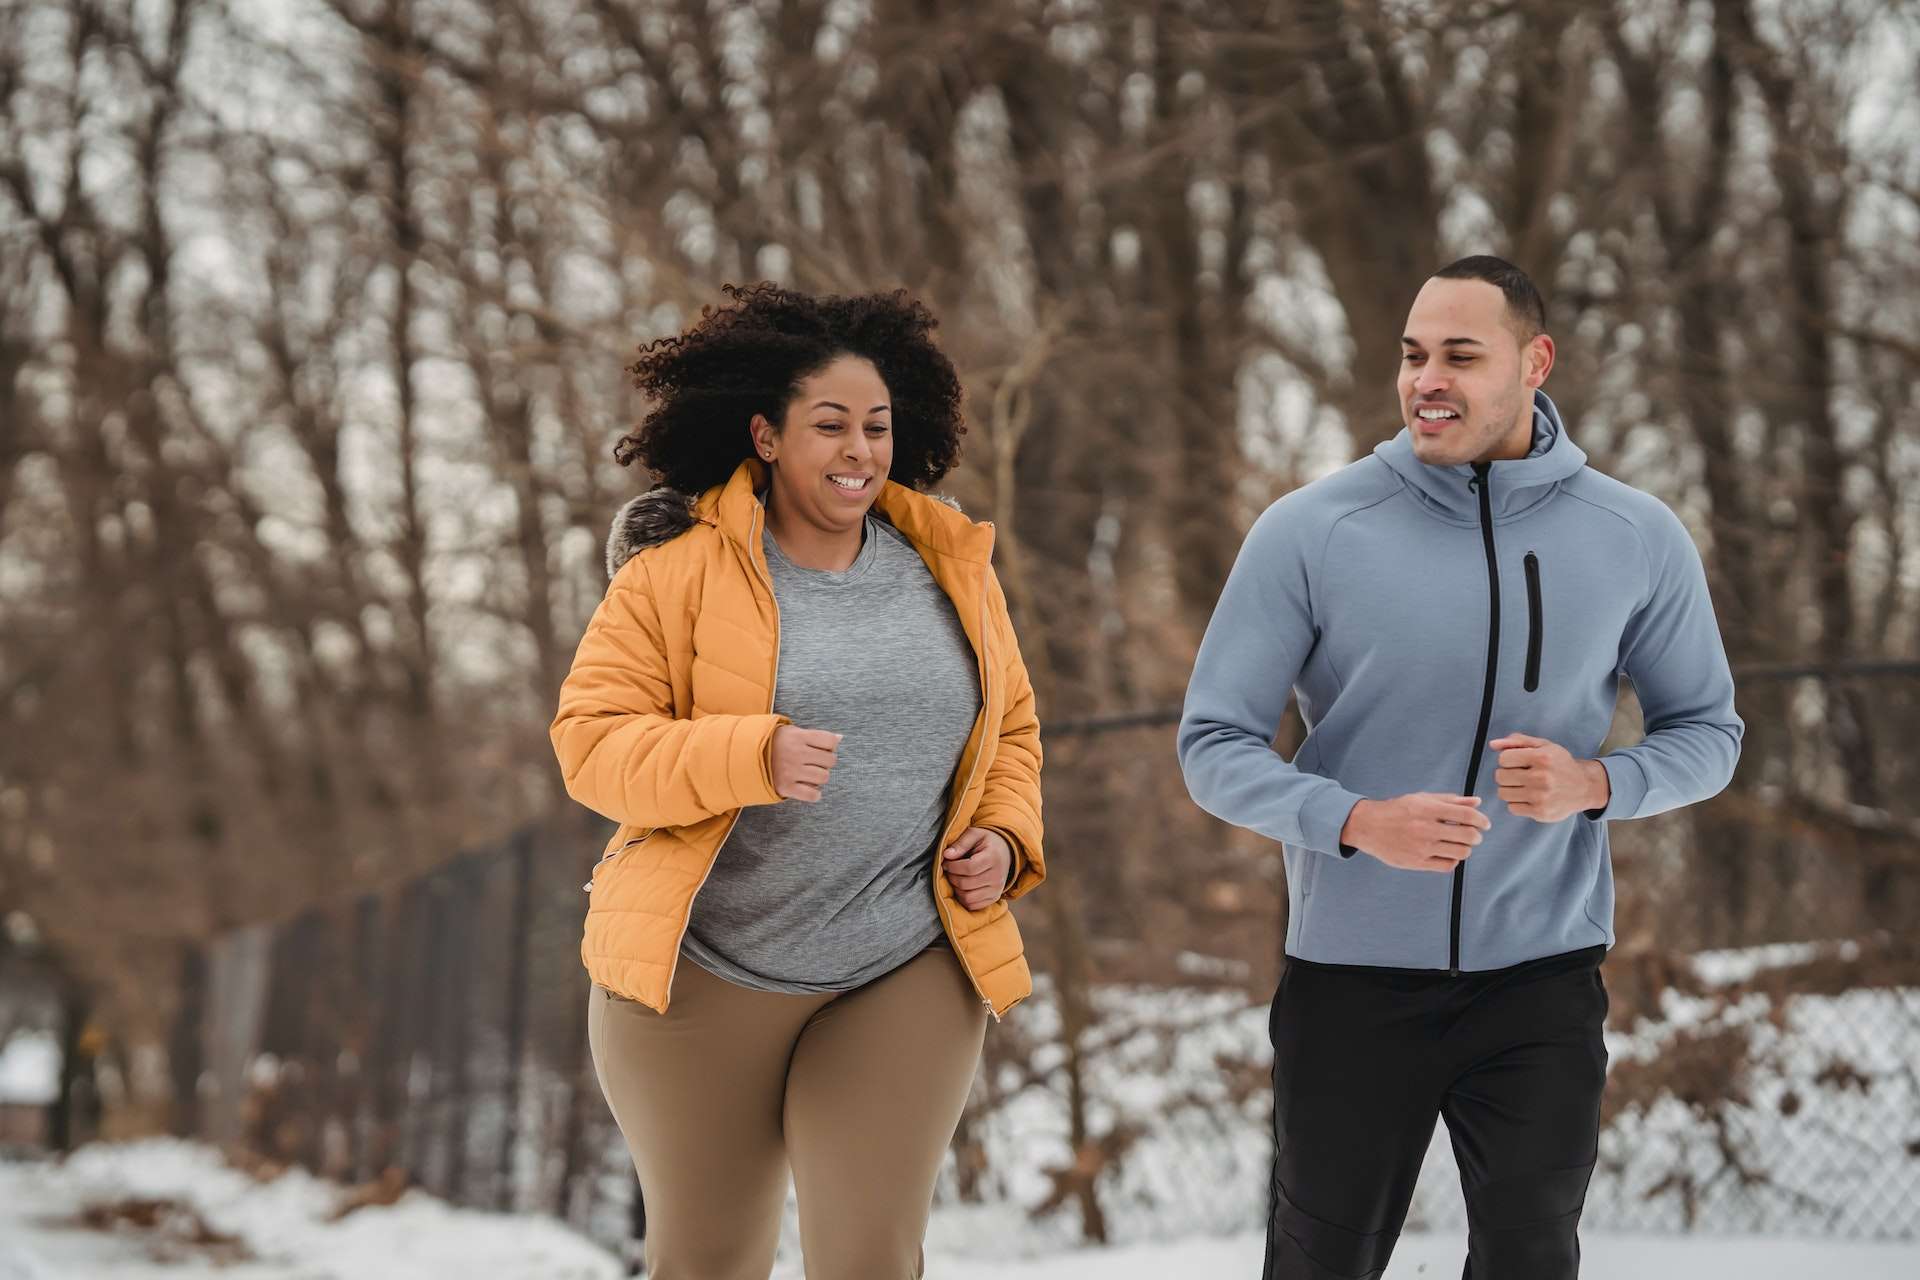 Cheerful multiethnic man and woman running together in winter park 